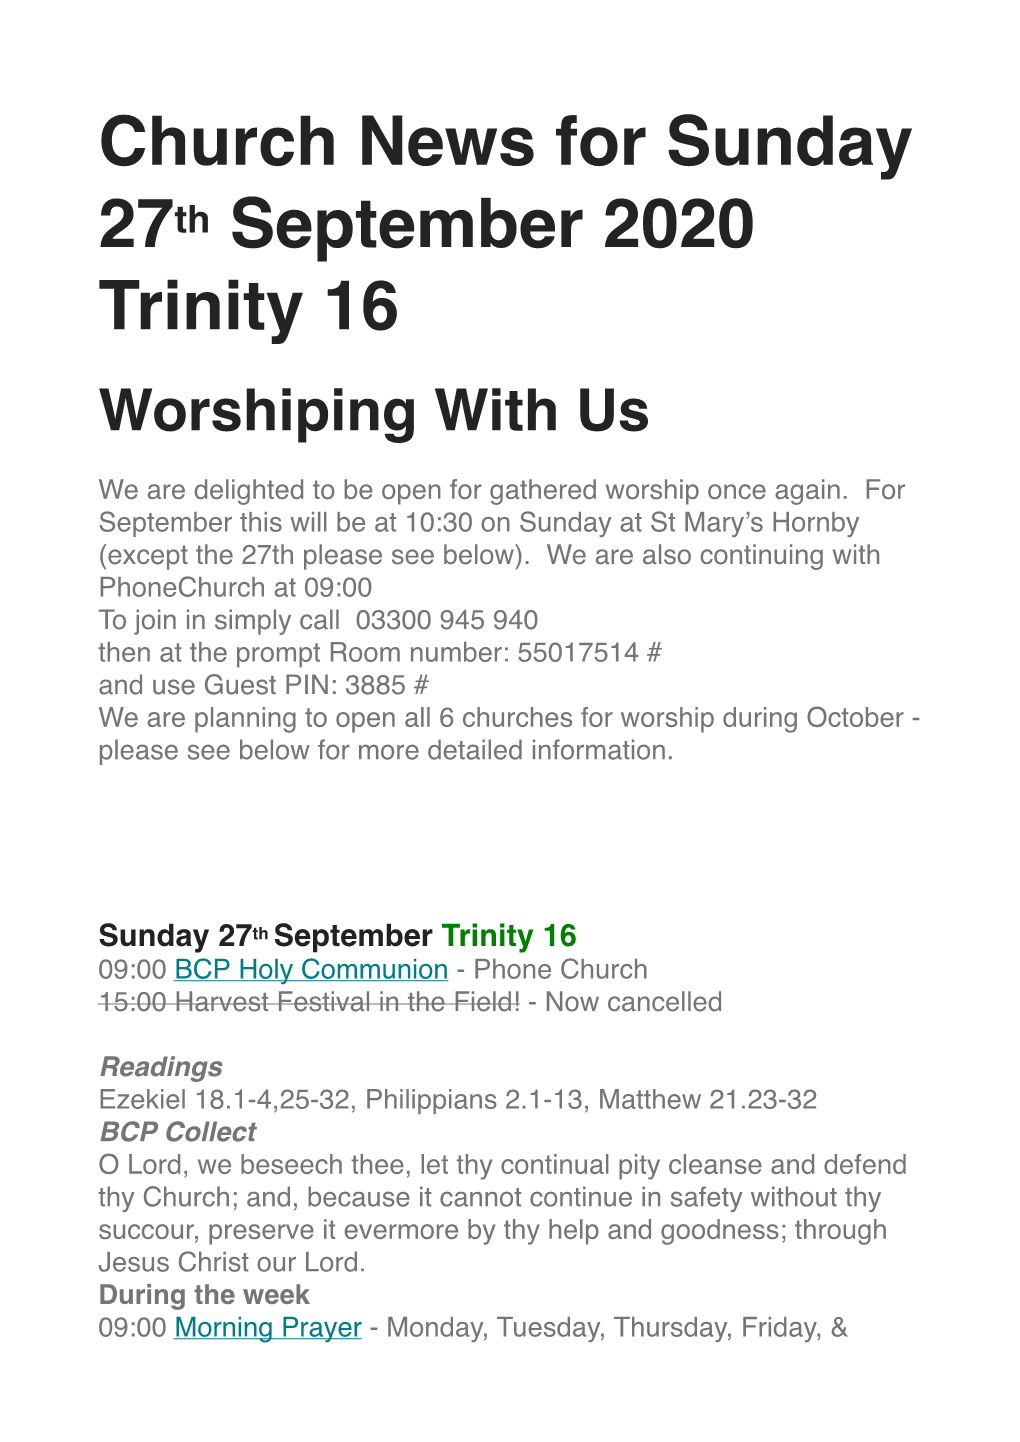 Church News for Sunday 27Th September 2020 Trinity 16 Worshiping with Us